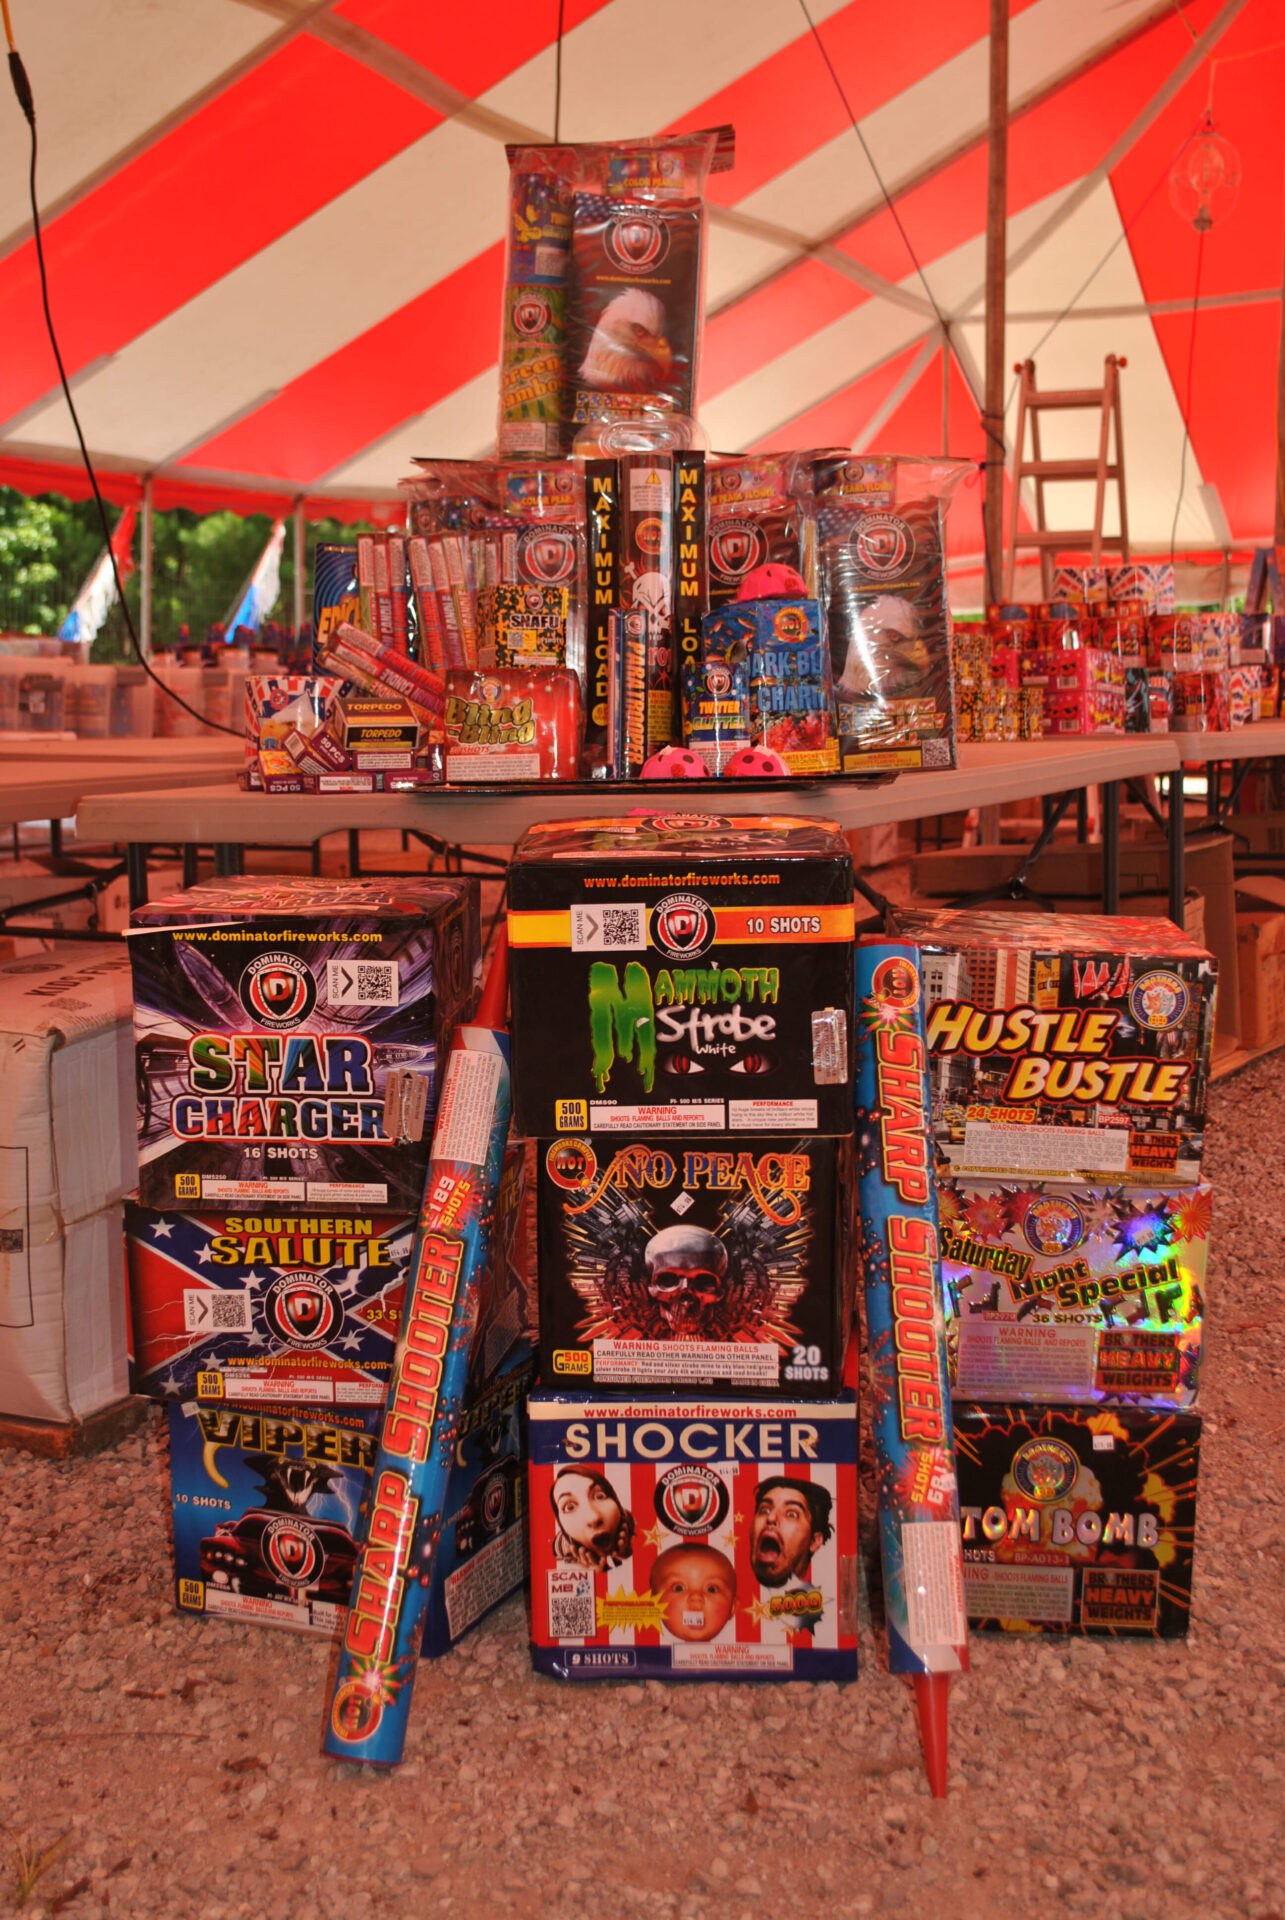 Local Firework Tent Offers Showstopping Fireworks, Fun for All